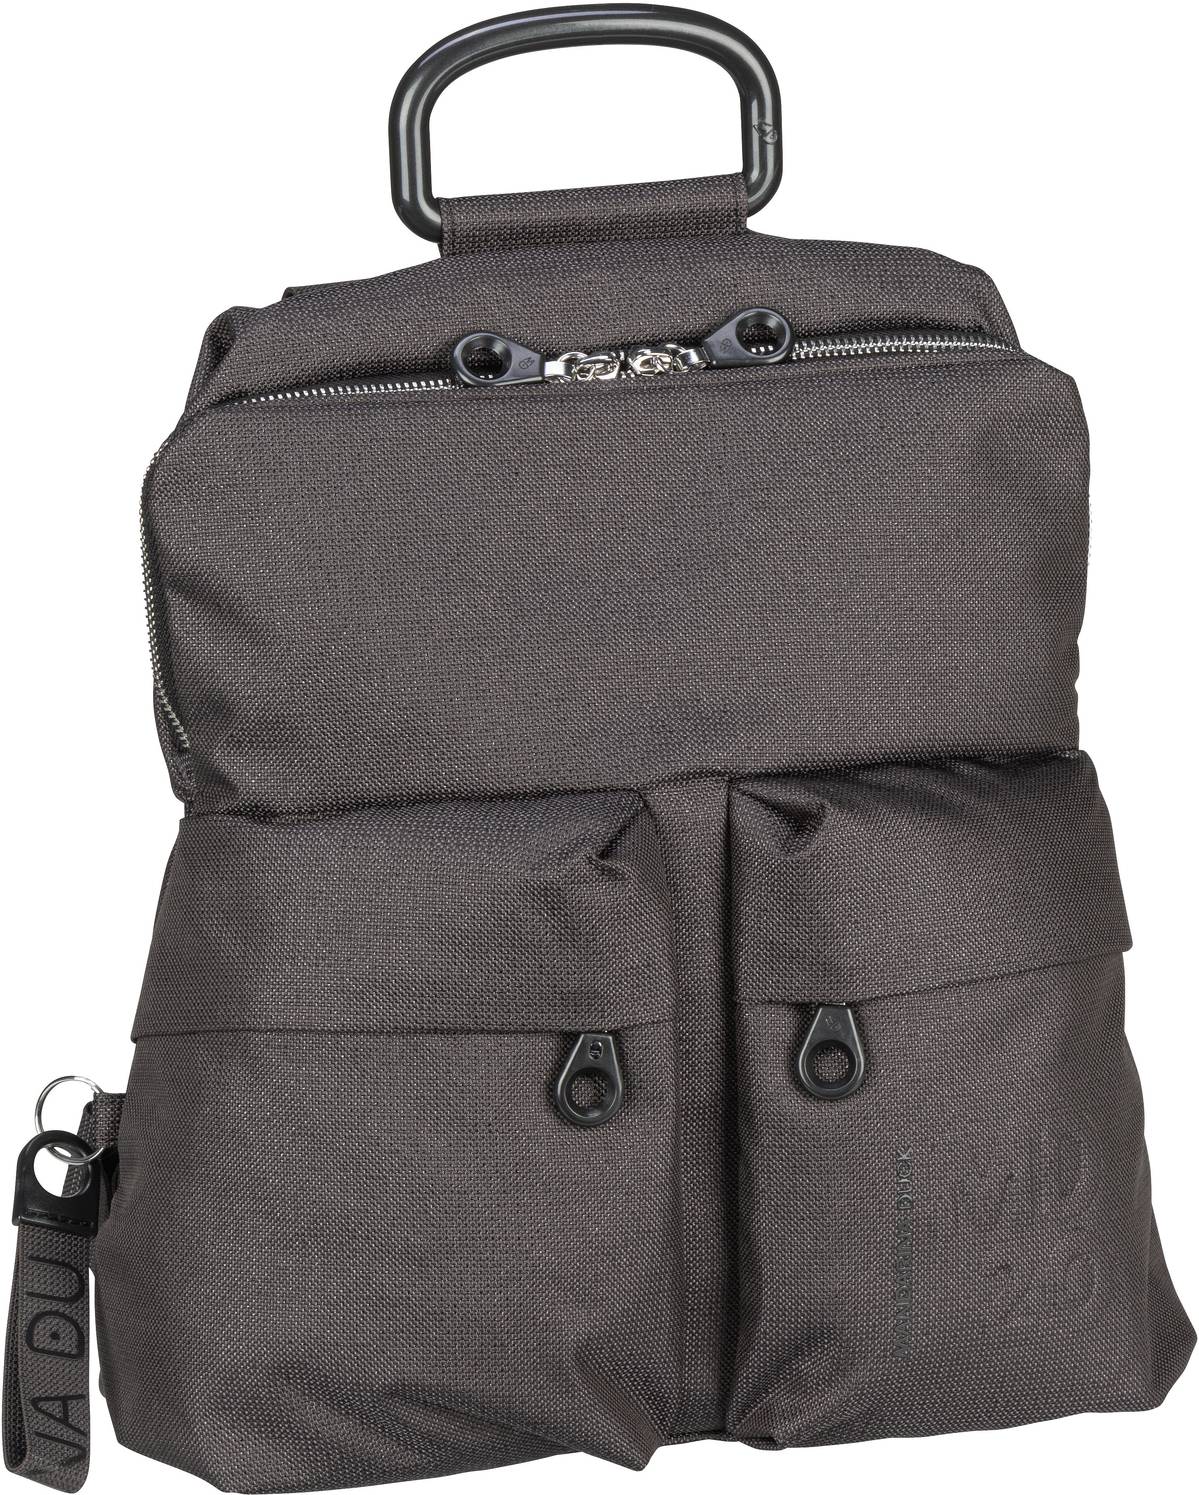 MD20 Lux Backpack QNTZ4